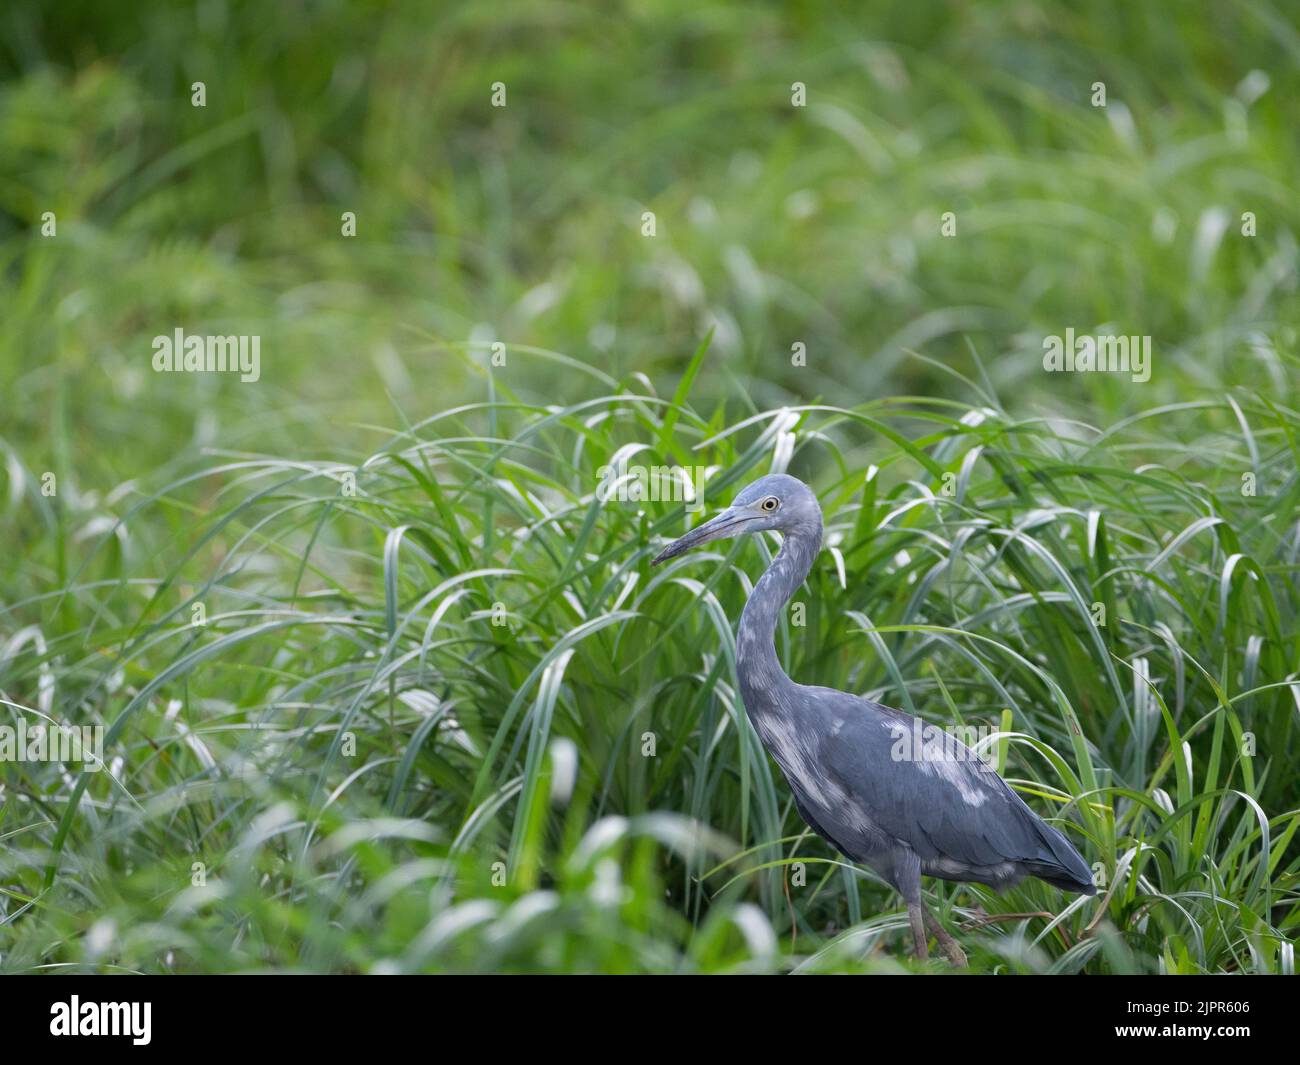 Immature Little Blue Heron with blue and white feathers standing in tall green grass. Photographed with a shallow depth of field. Stock Photo